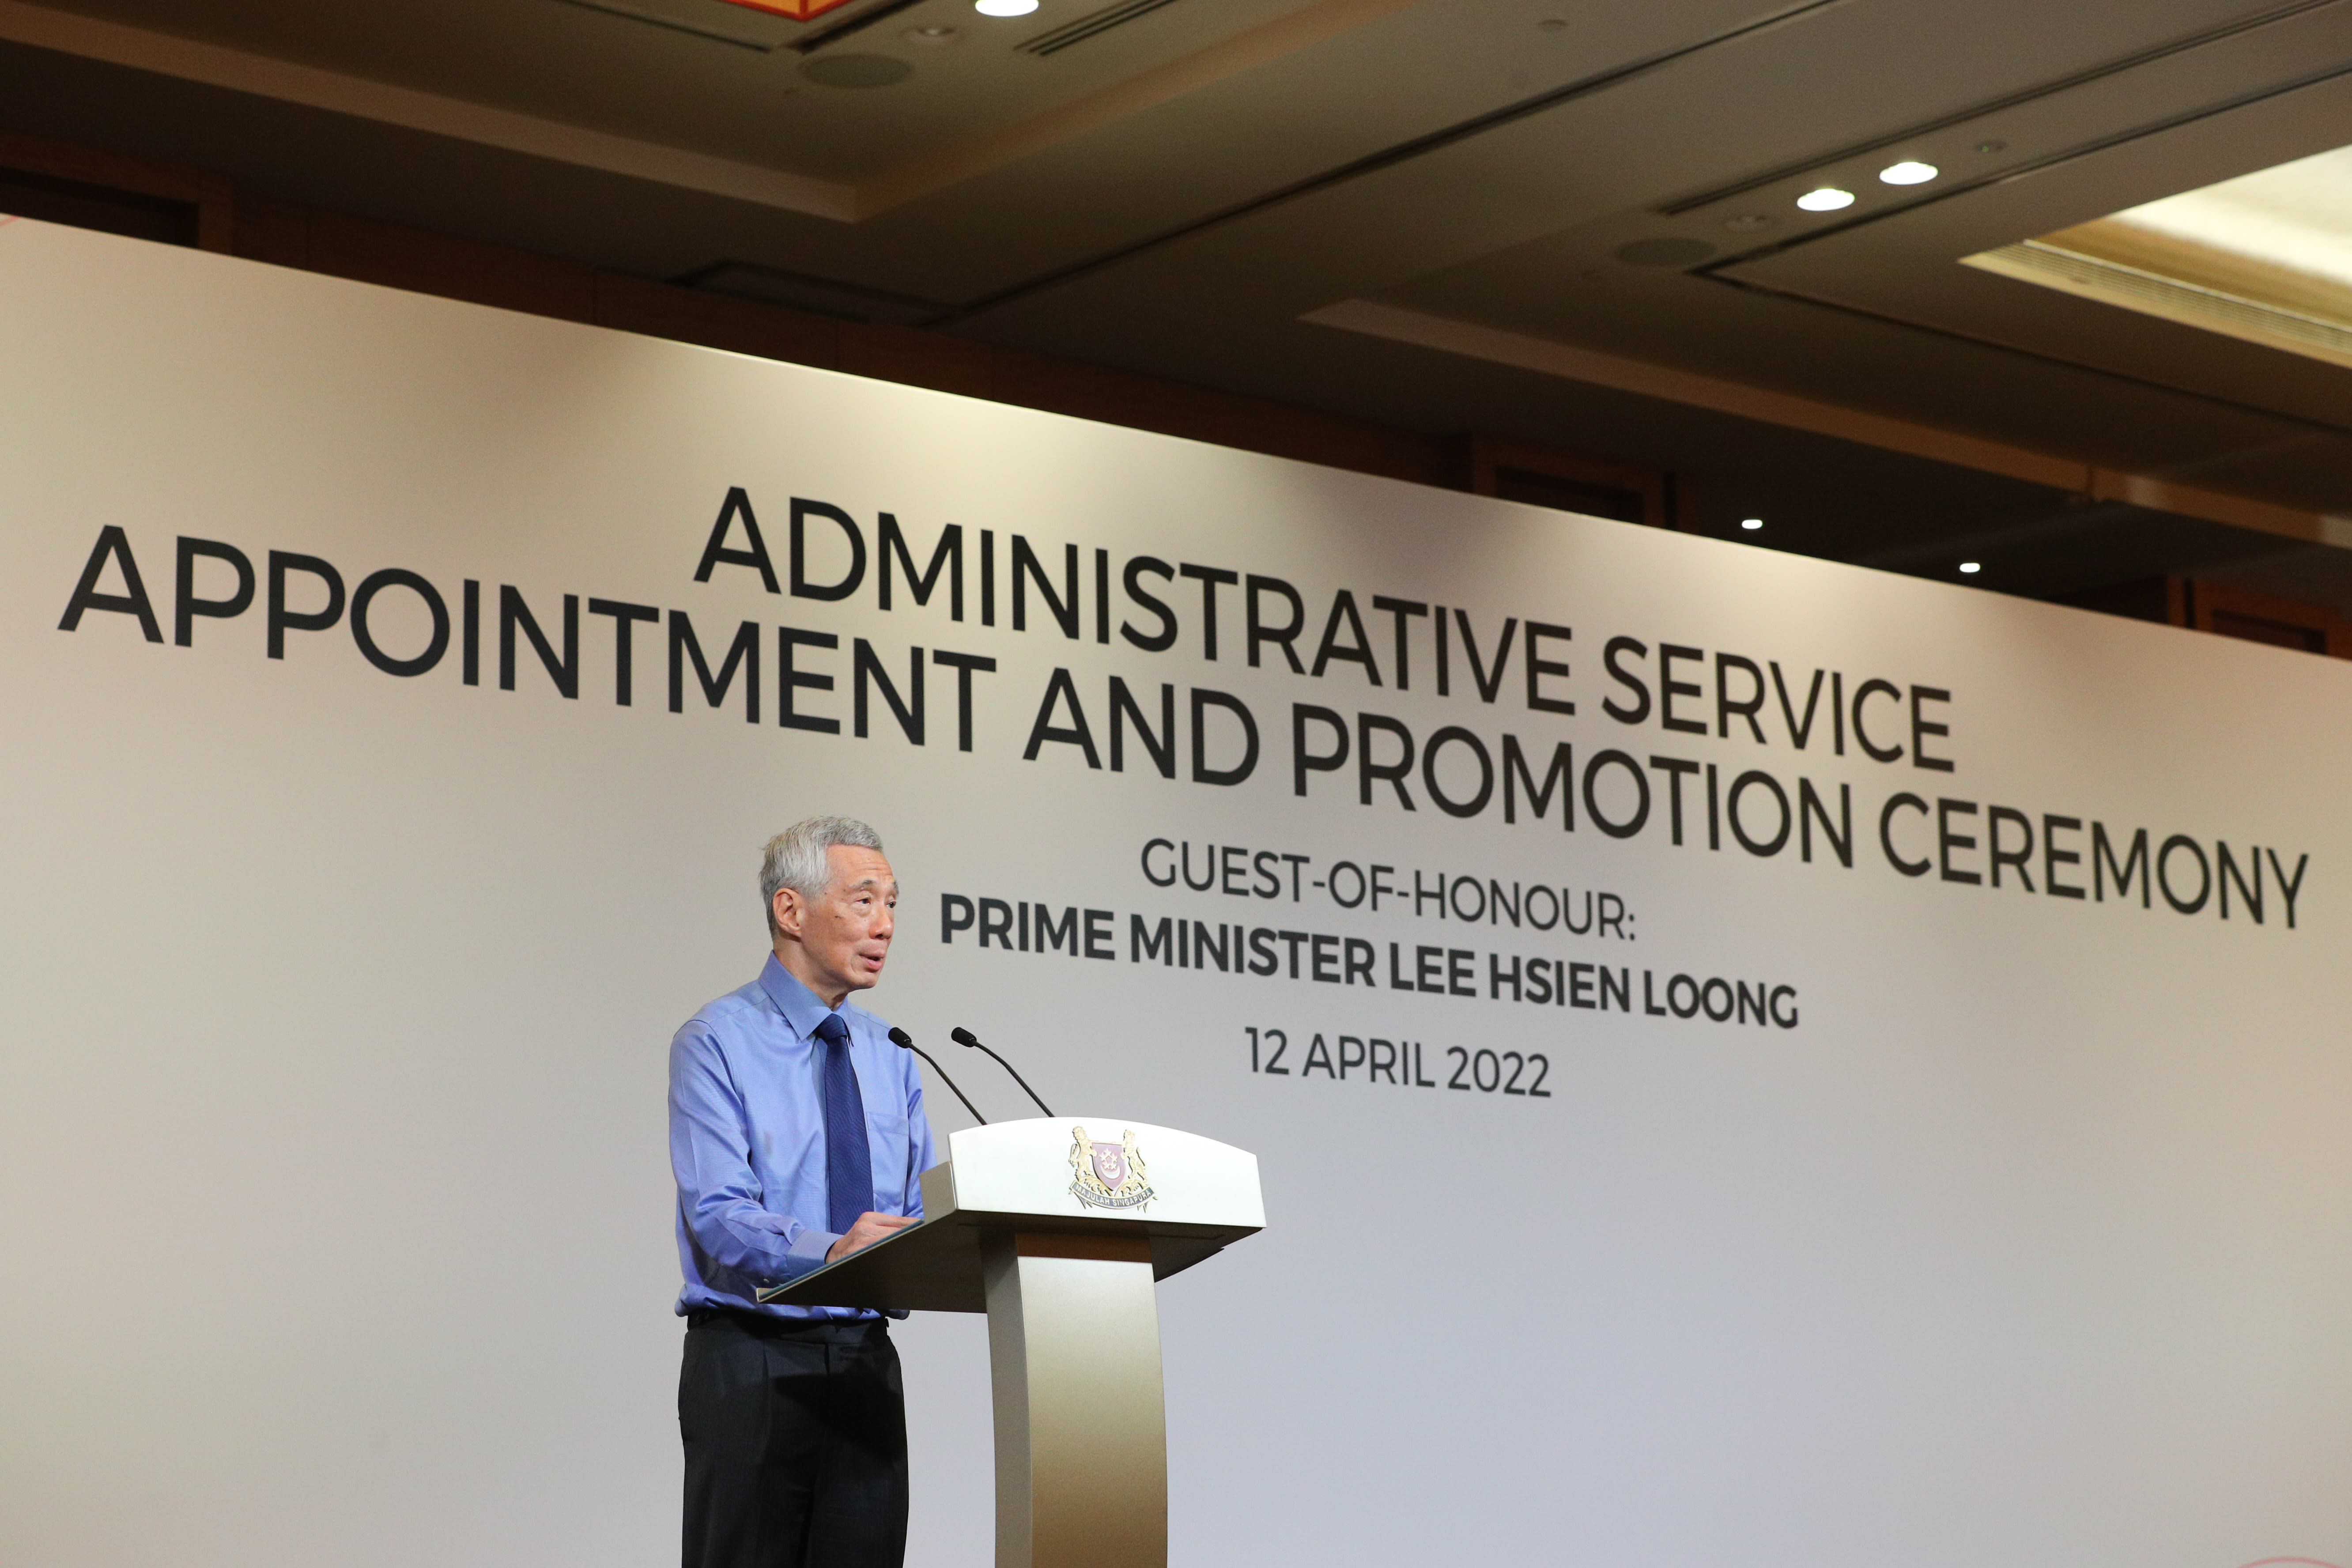 Prime Minister Lee Hsien Loong speaking at the annual Administrative Service dinner and promotion ceremony at the Marina Bay Sands Expo and Convention Centre on April 12, 2022.